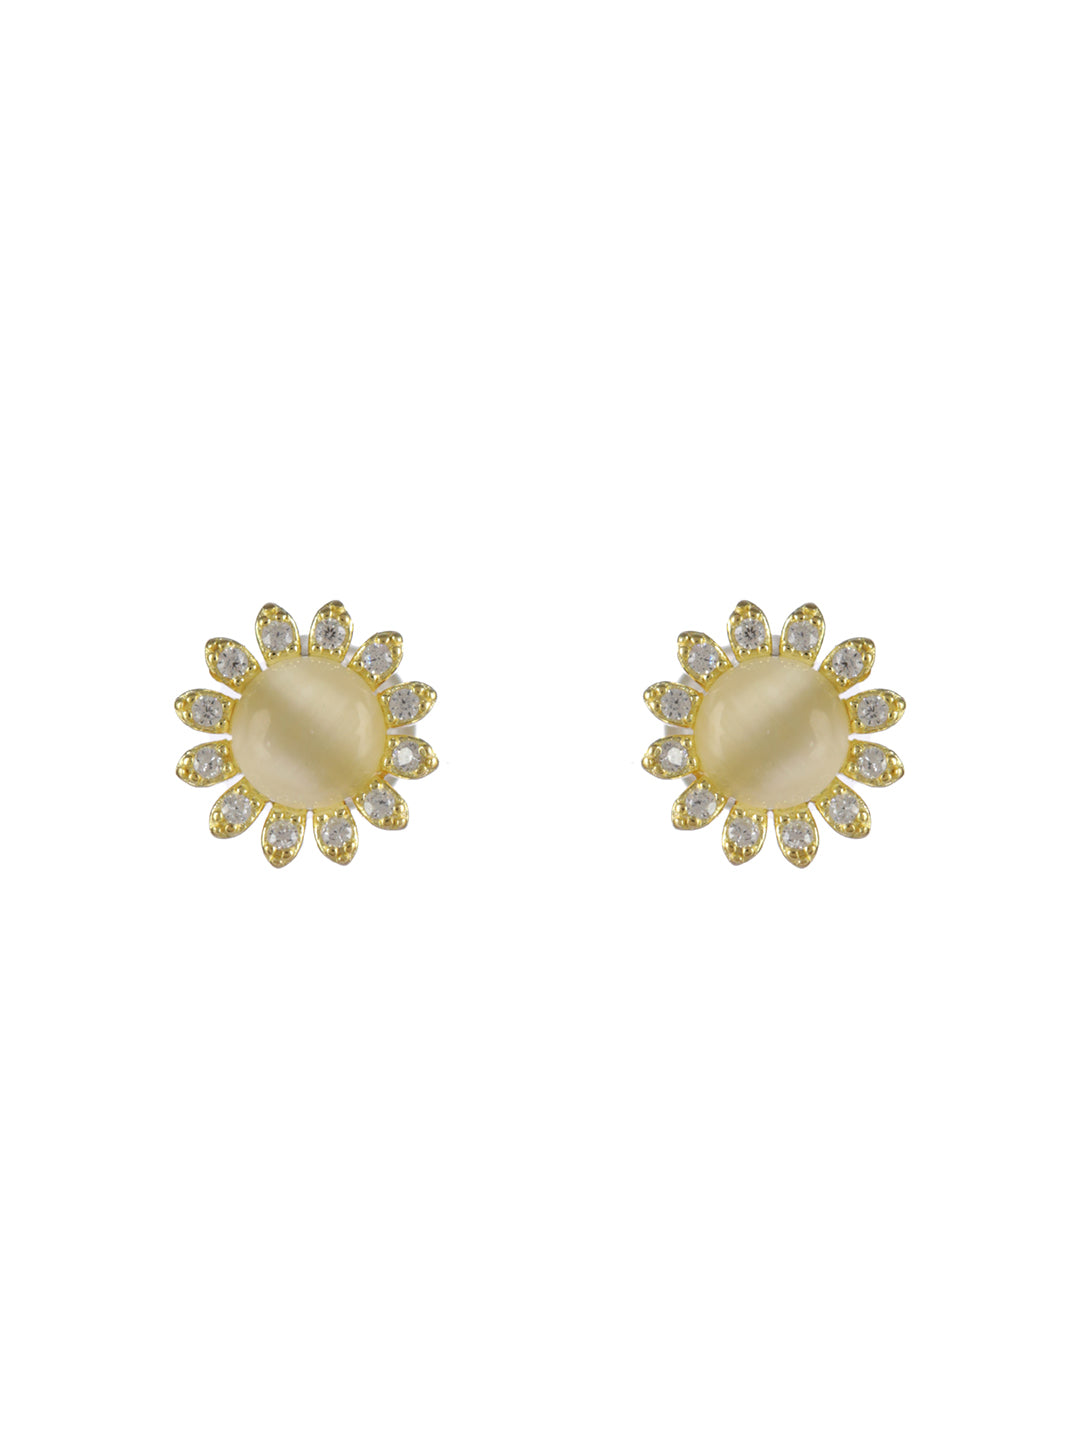 Sheer by Priyaasi Studded Floral Gold-Plated Sterling Silver Earrings